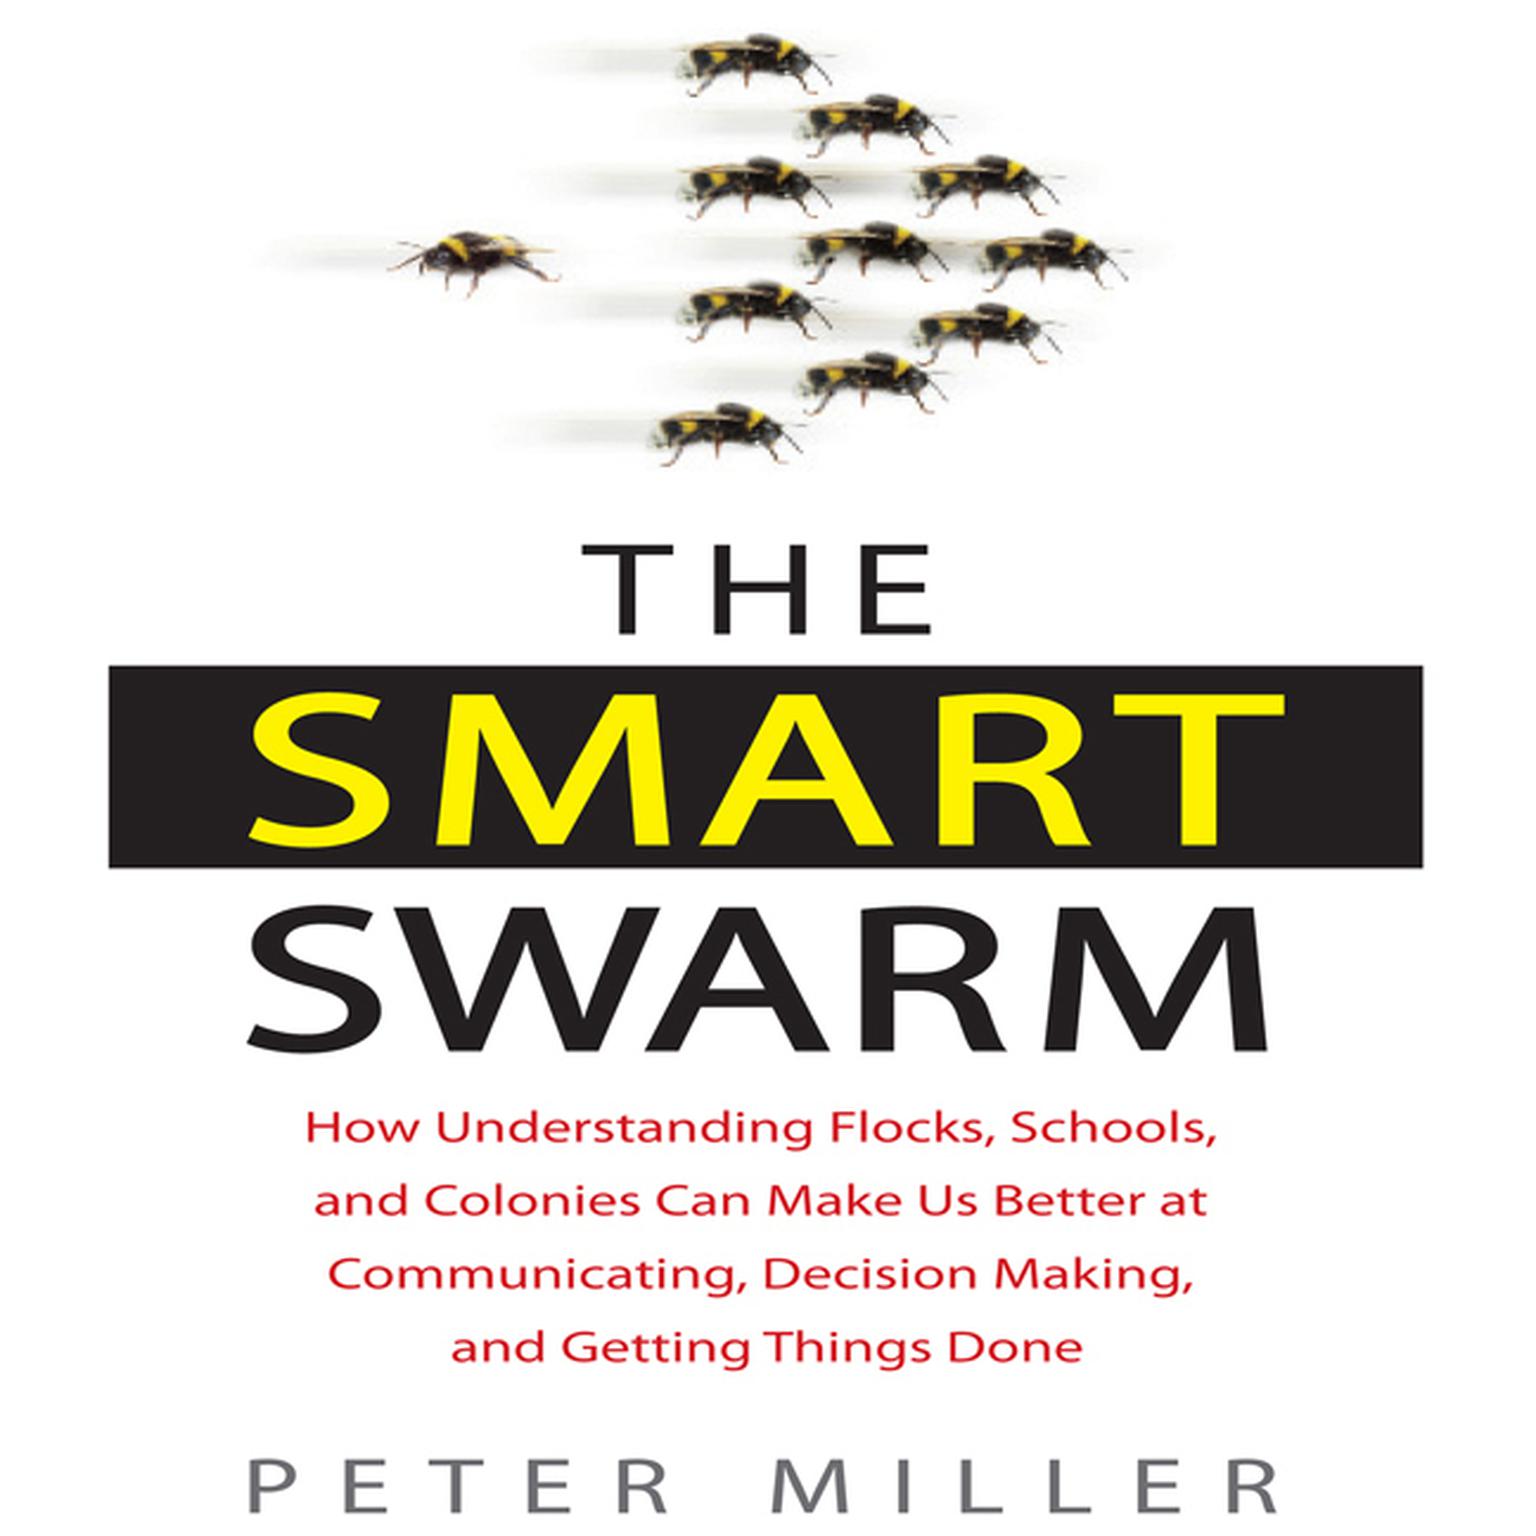 The Smart Swarm: How Understanding Flocks, Schools, and Colonies Can Make Us Better at Communicating, Decision Making, and Getting Things Done Audiobook, by Peter Miller